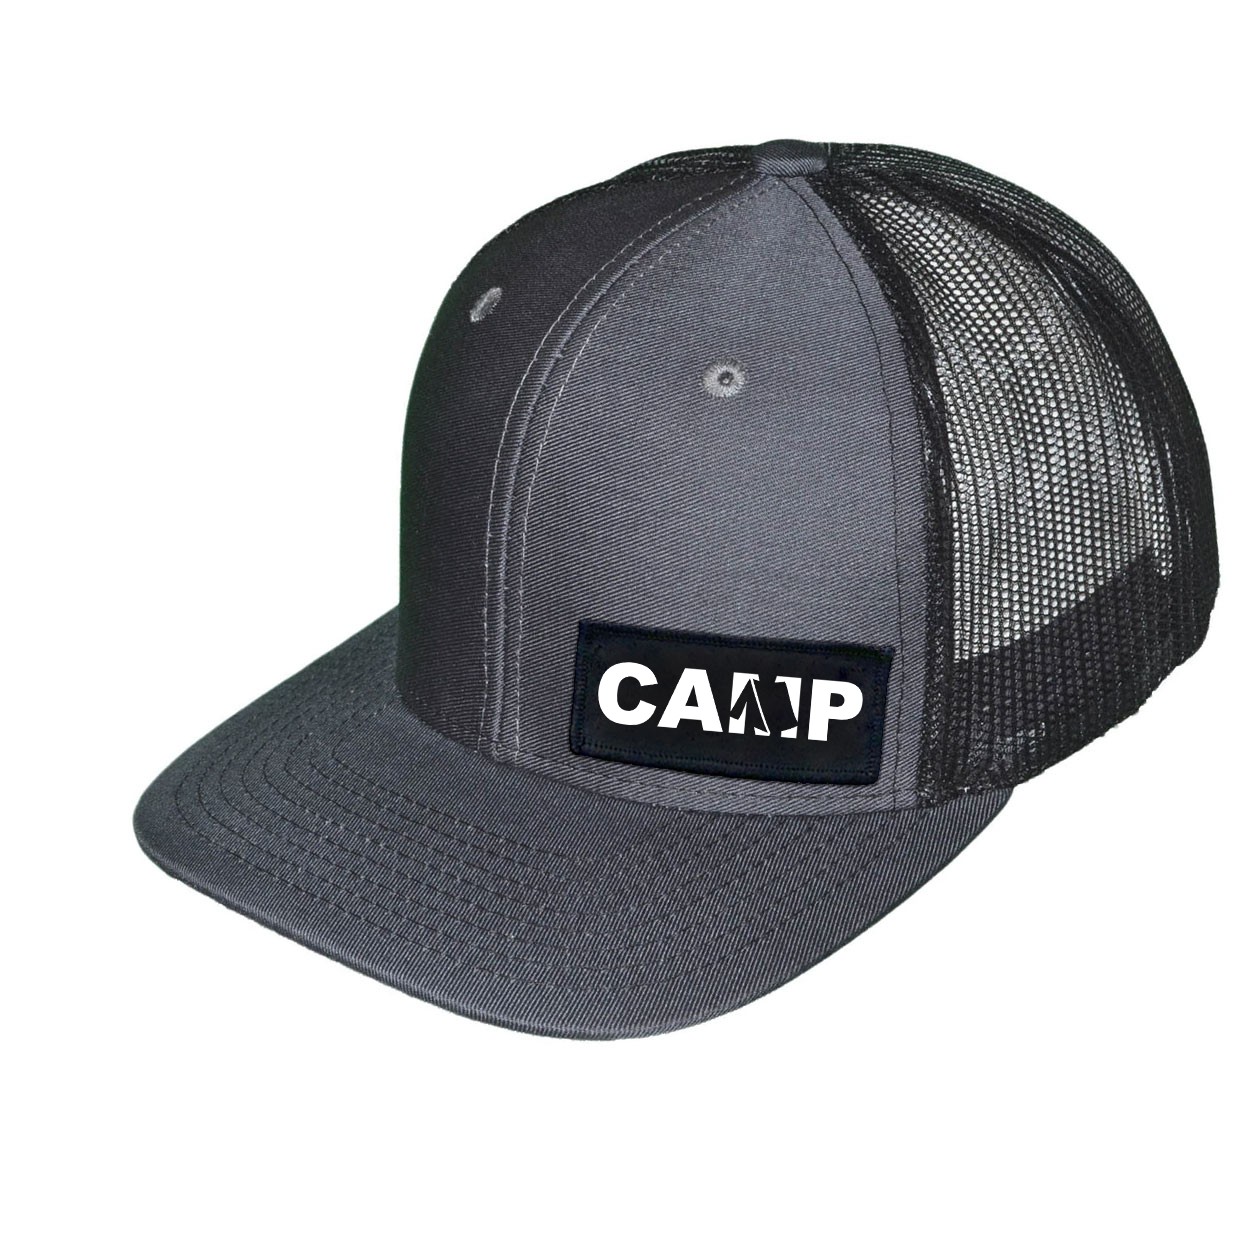 Camp Tent Logo Night Out Woven Patch Snapback Trucker Hat Gray/Black (White Logo)